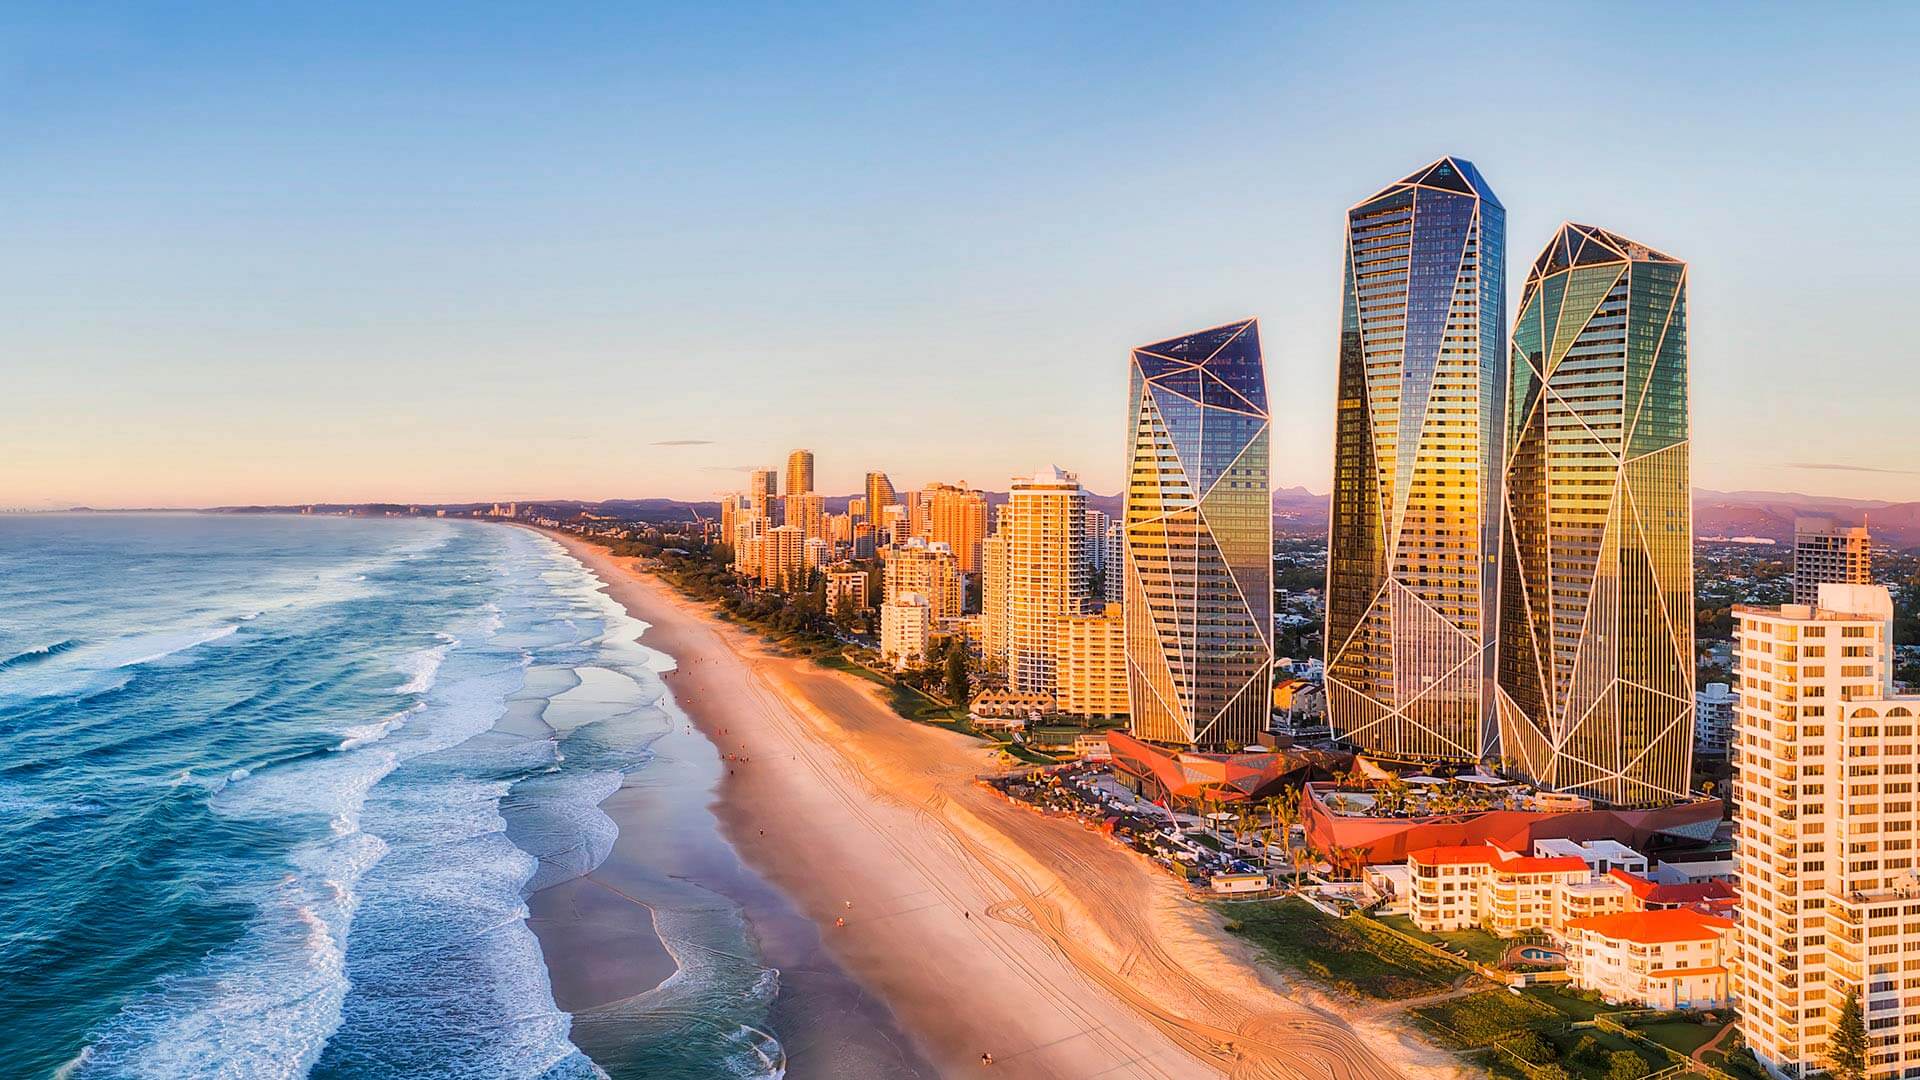 About Gold Coast